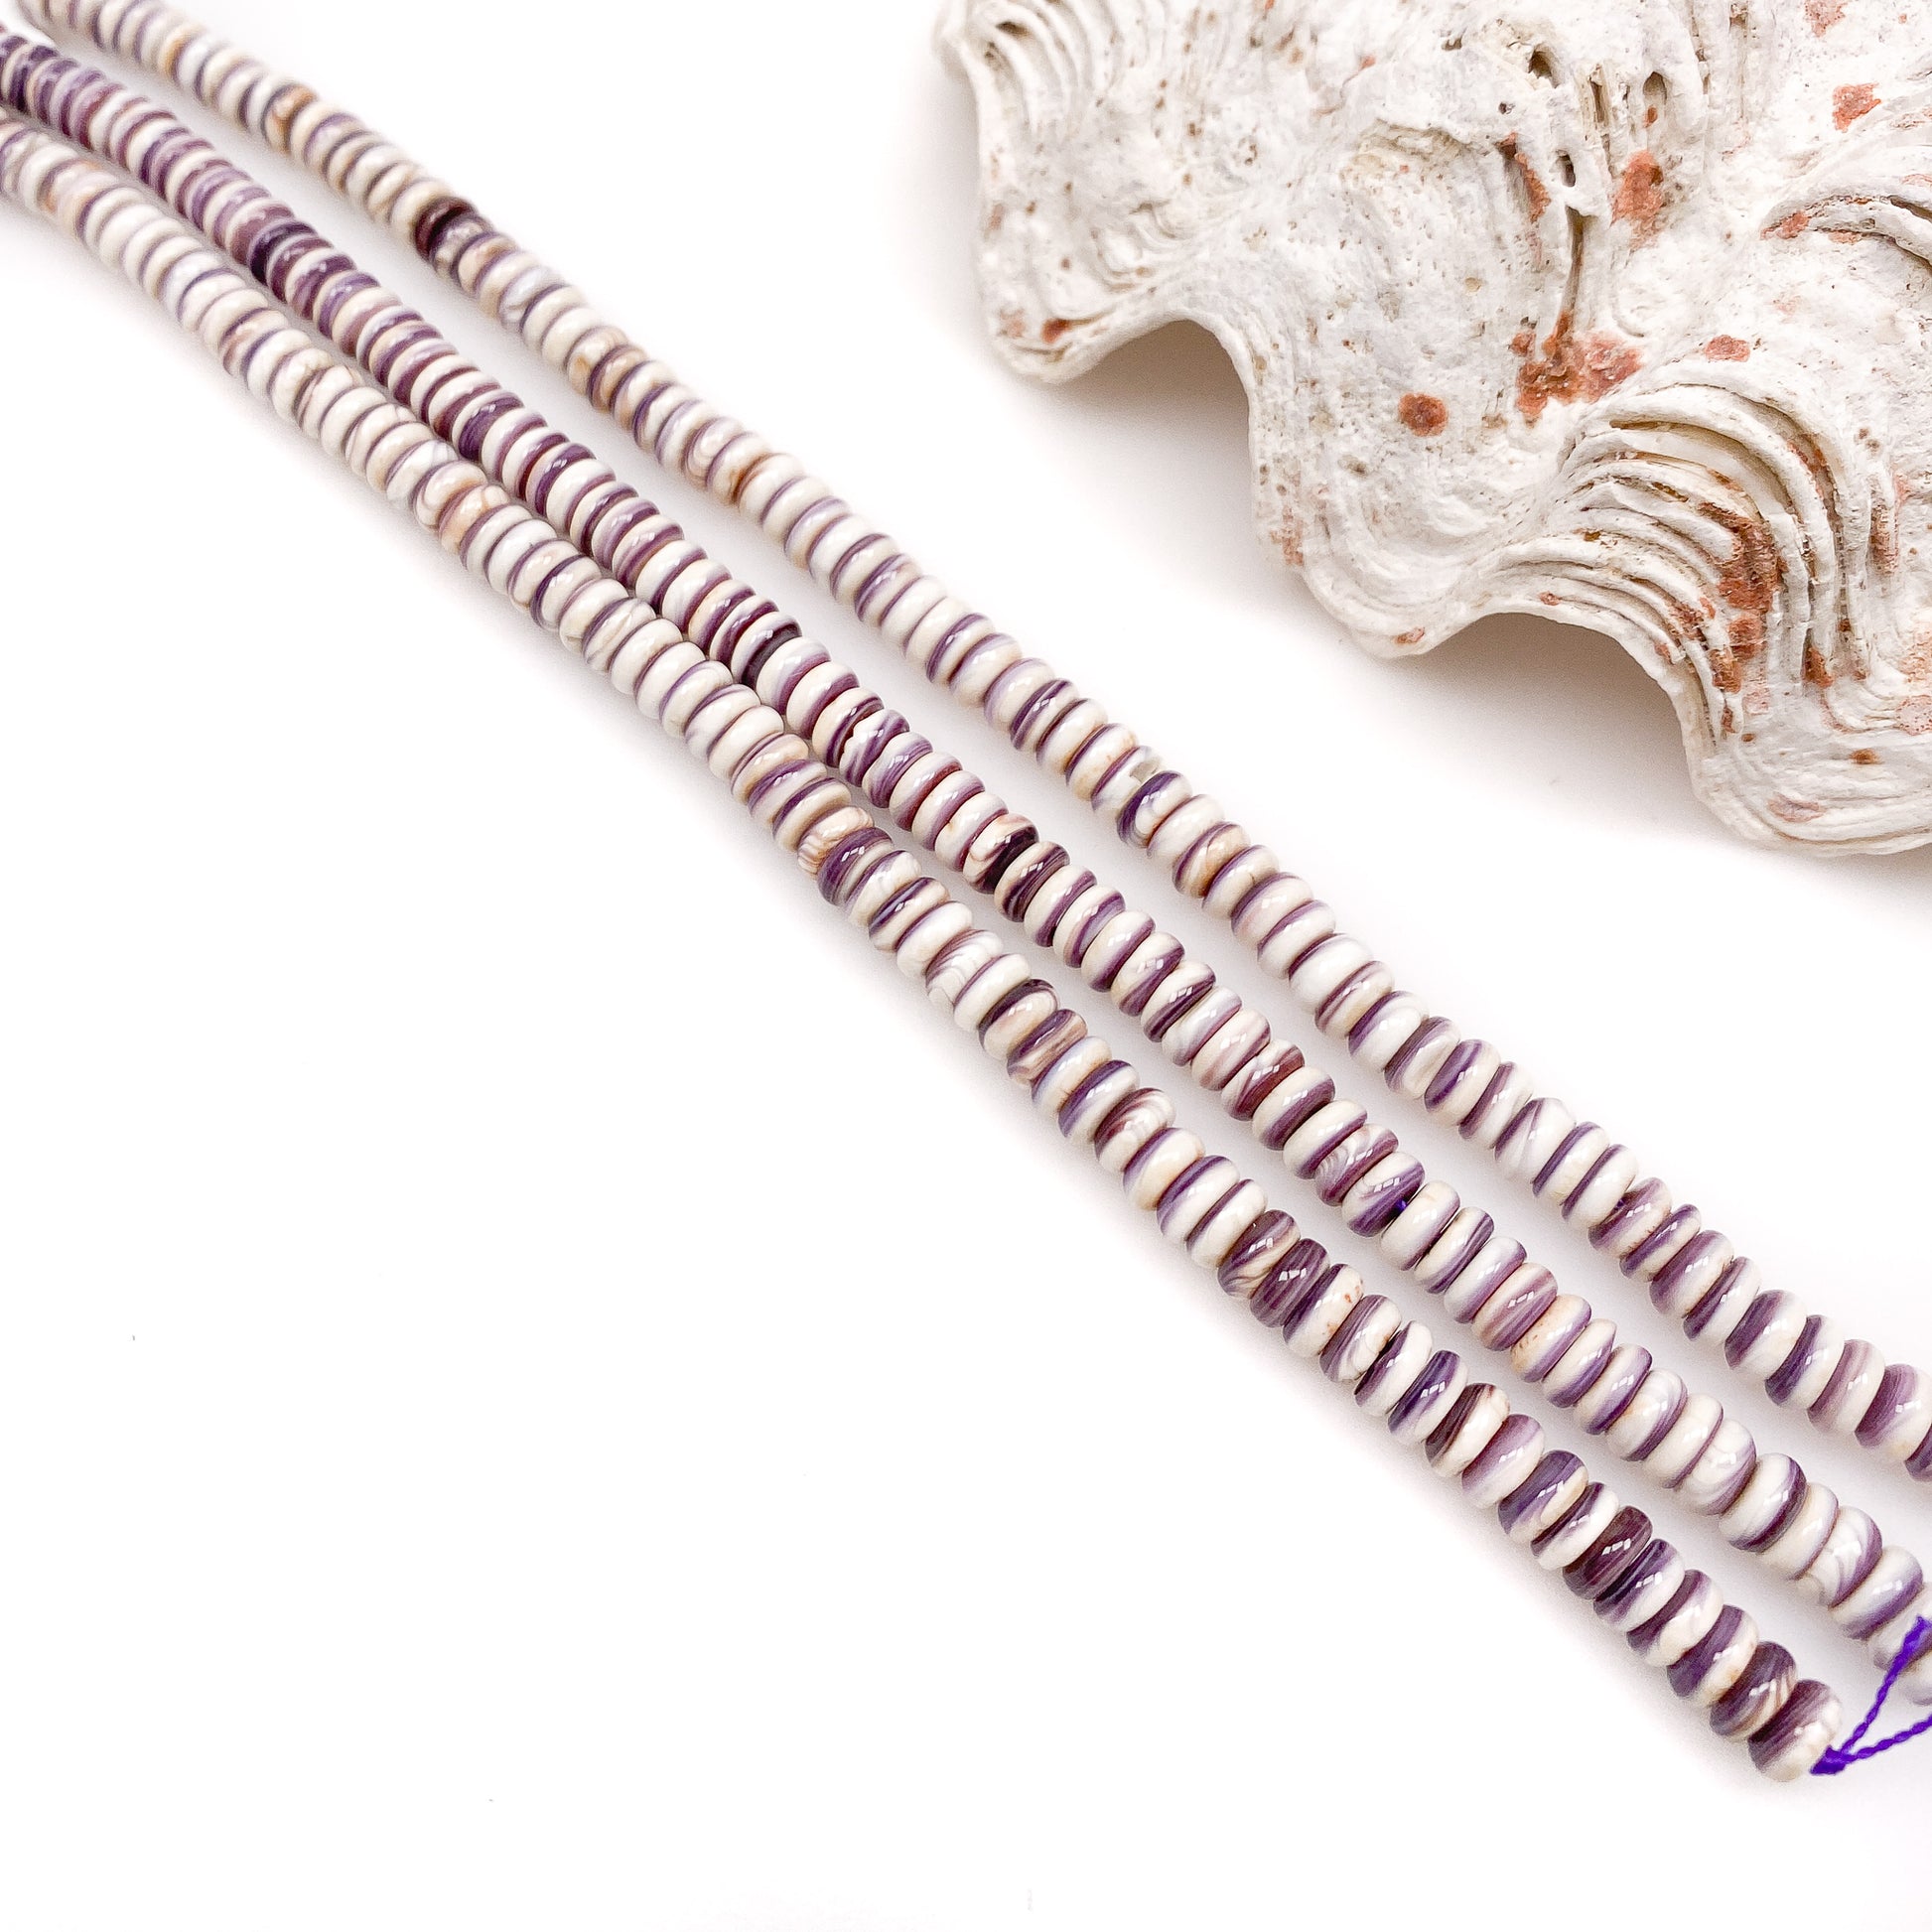 Wampum Shell 6mm Smooth Rondelle Bead (2 Quantities Available)